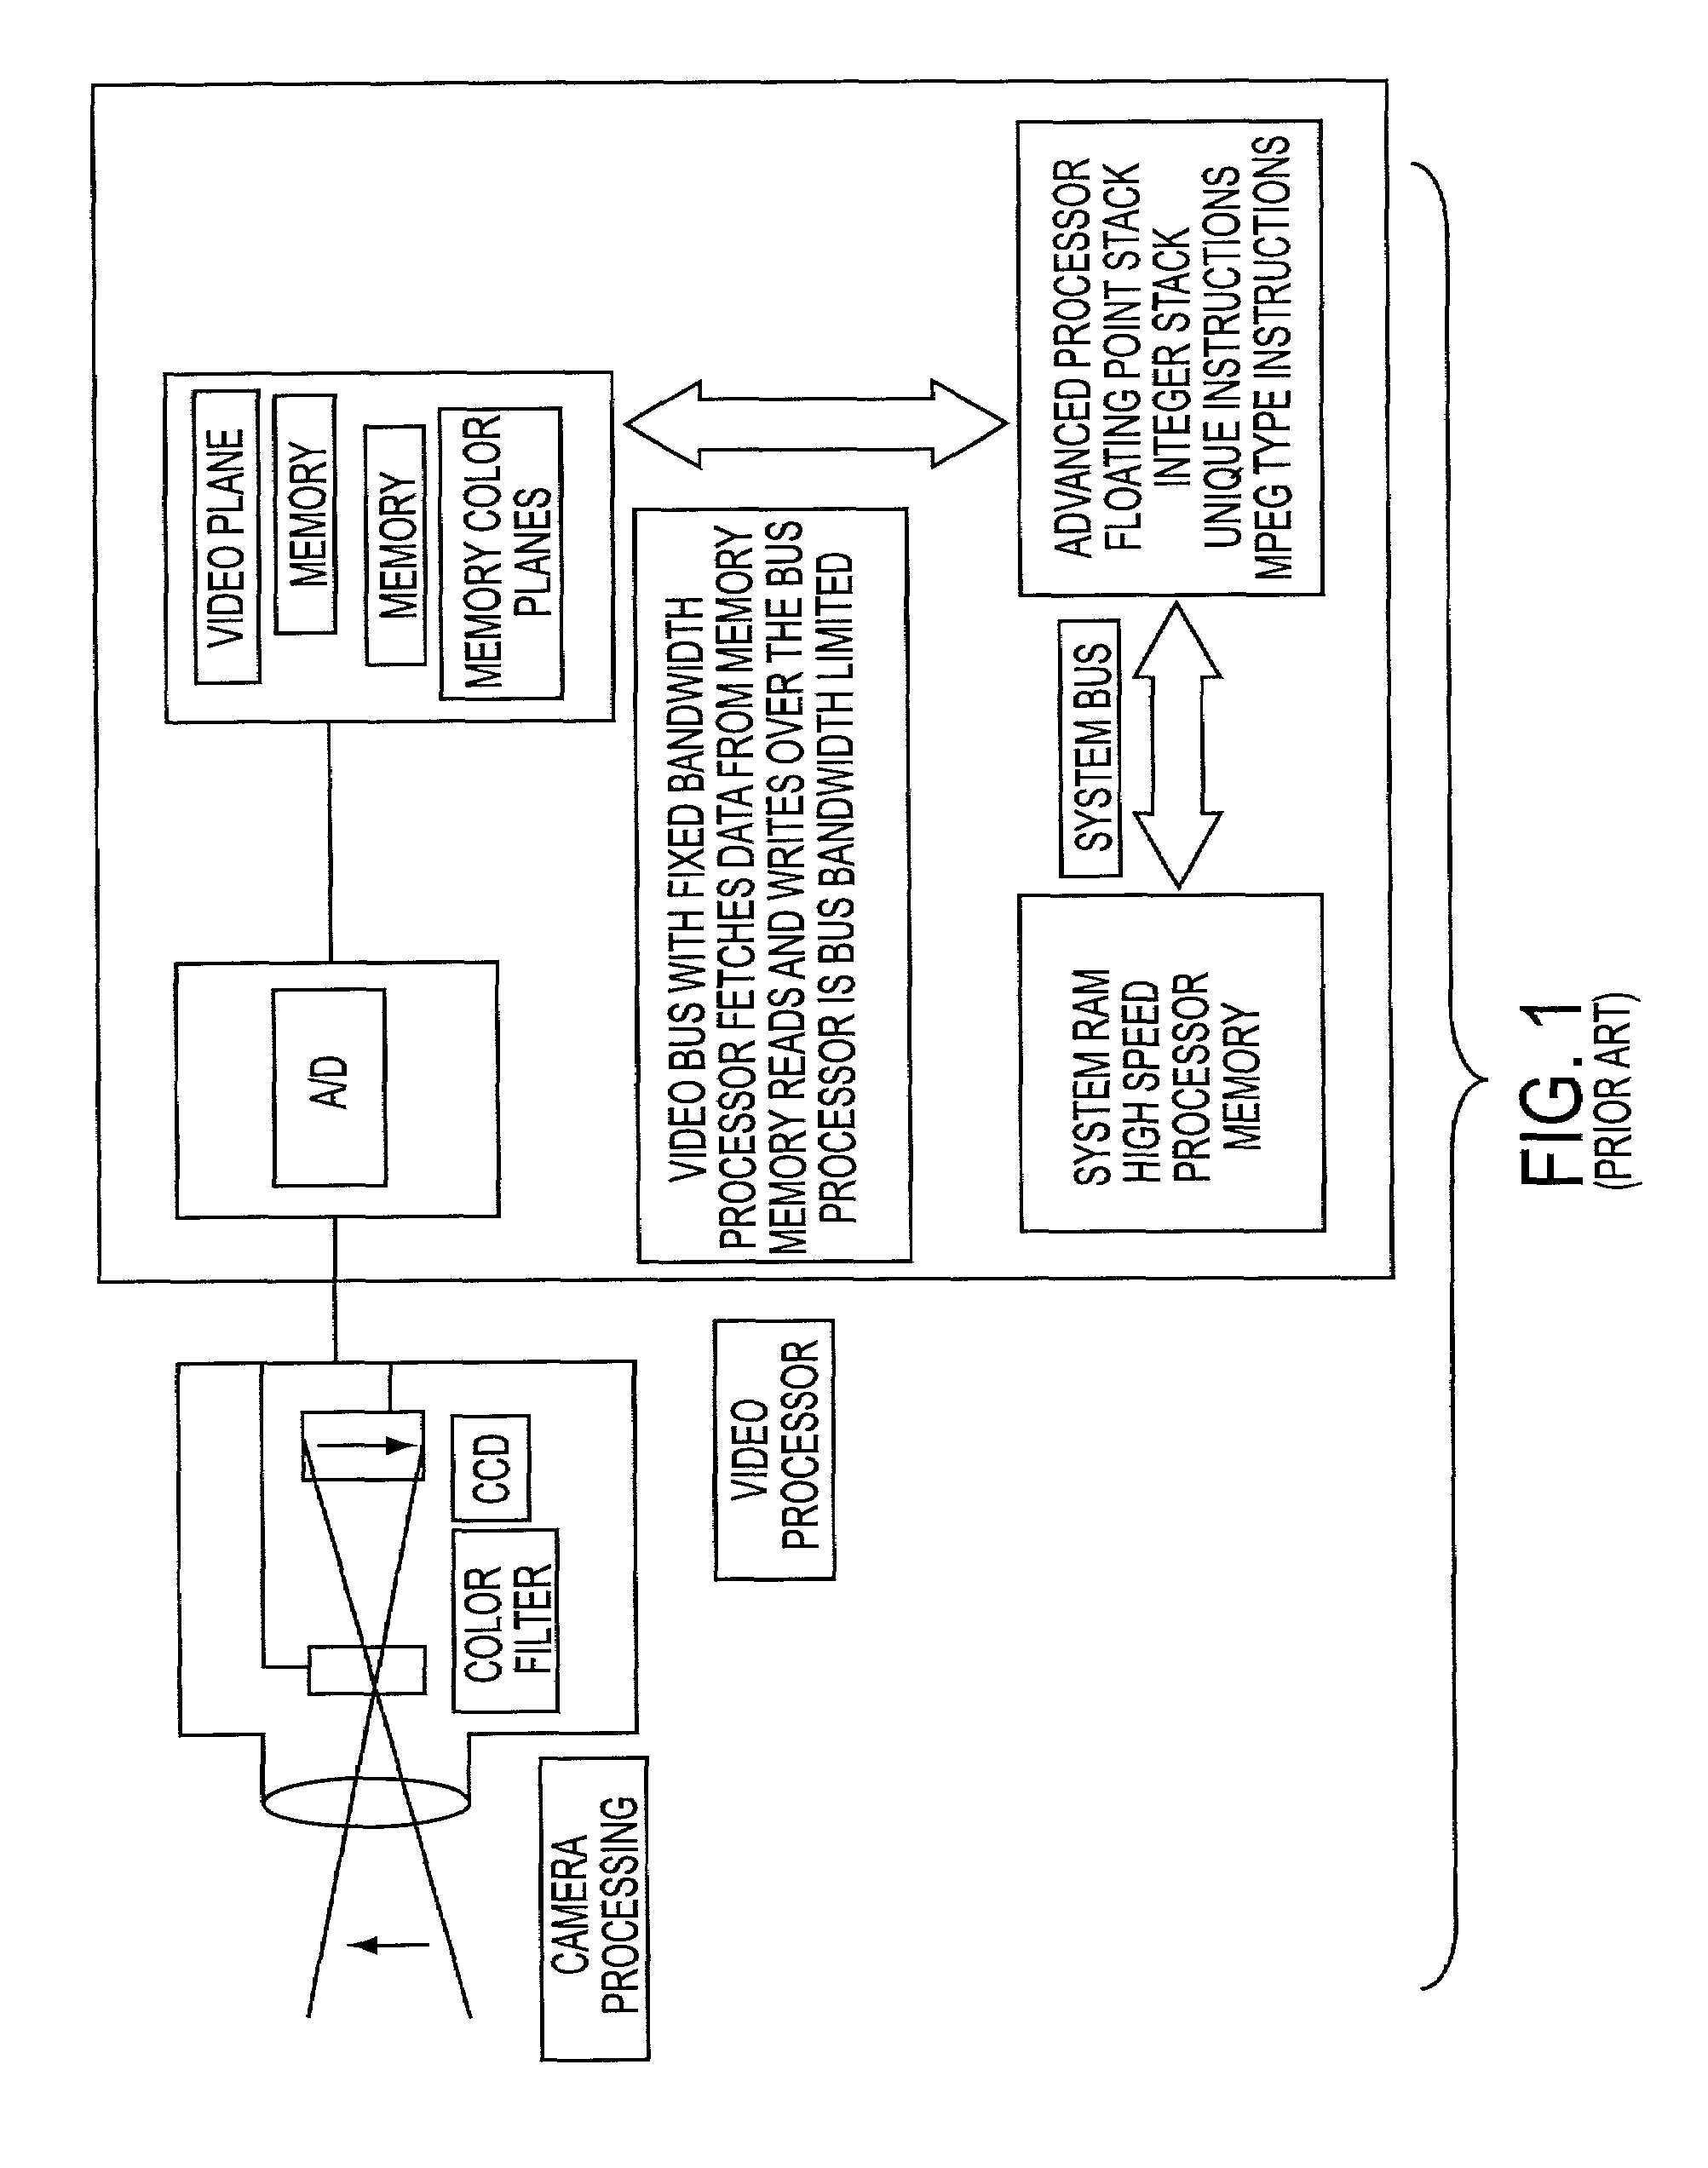 System and method for generating digital data and processing in a memory